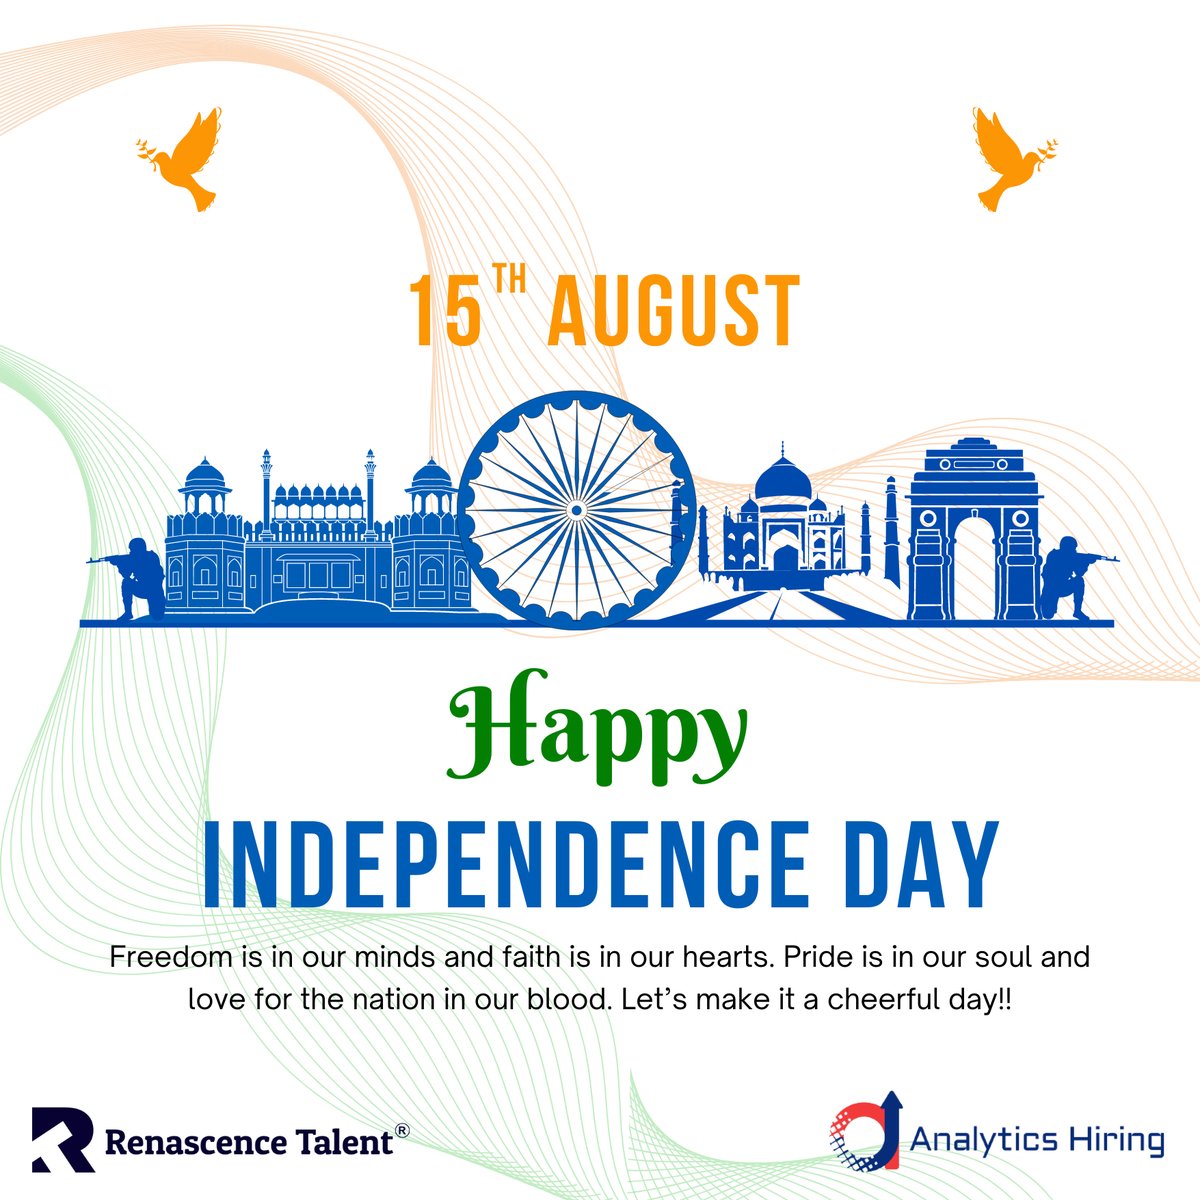 “Freedom is nothing but a chance to be better - Albert Camus.

#happyindependenceday #jaihind #india #renascencetalent #analyticshiring